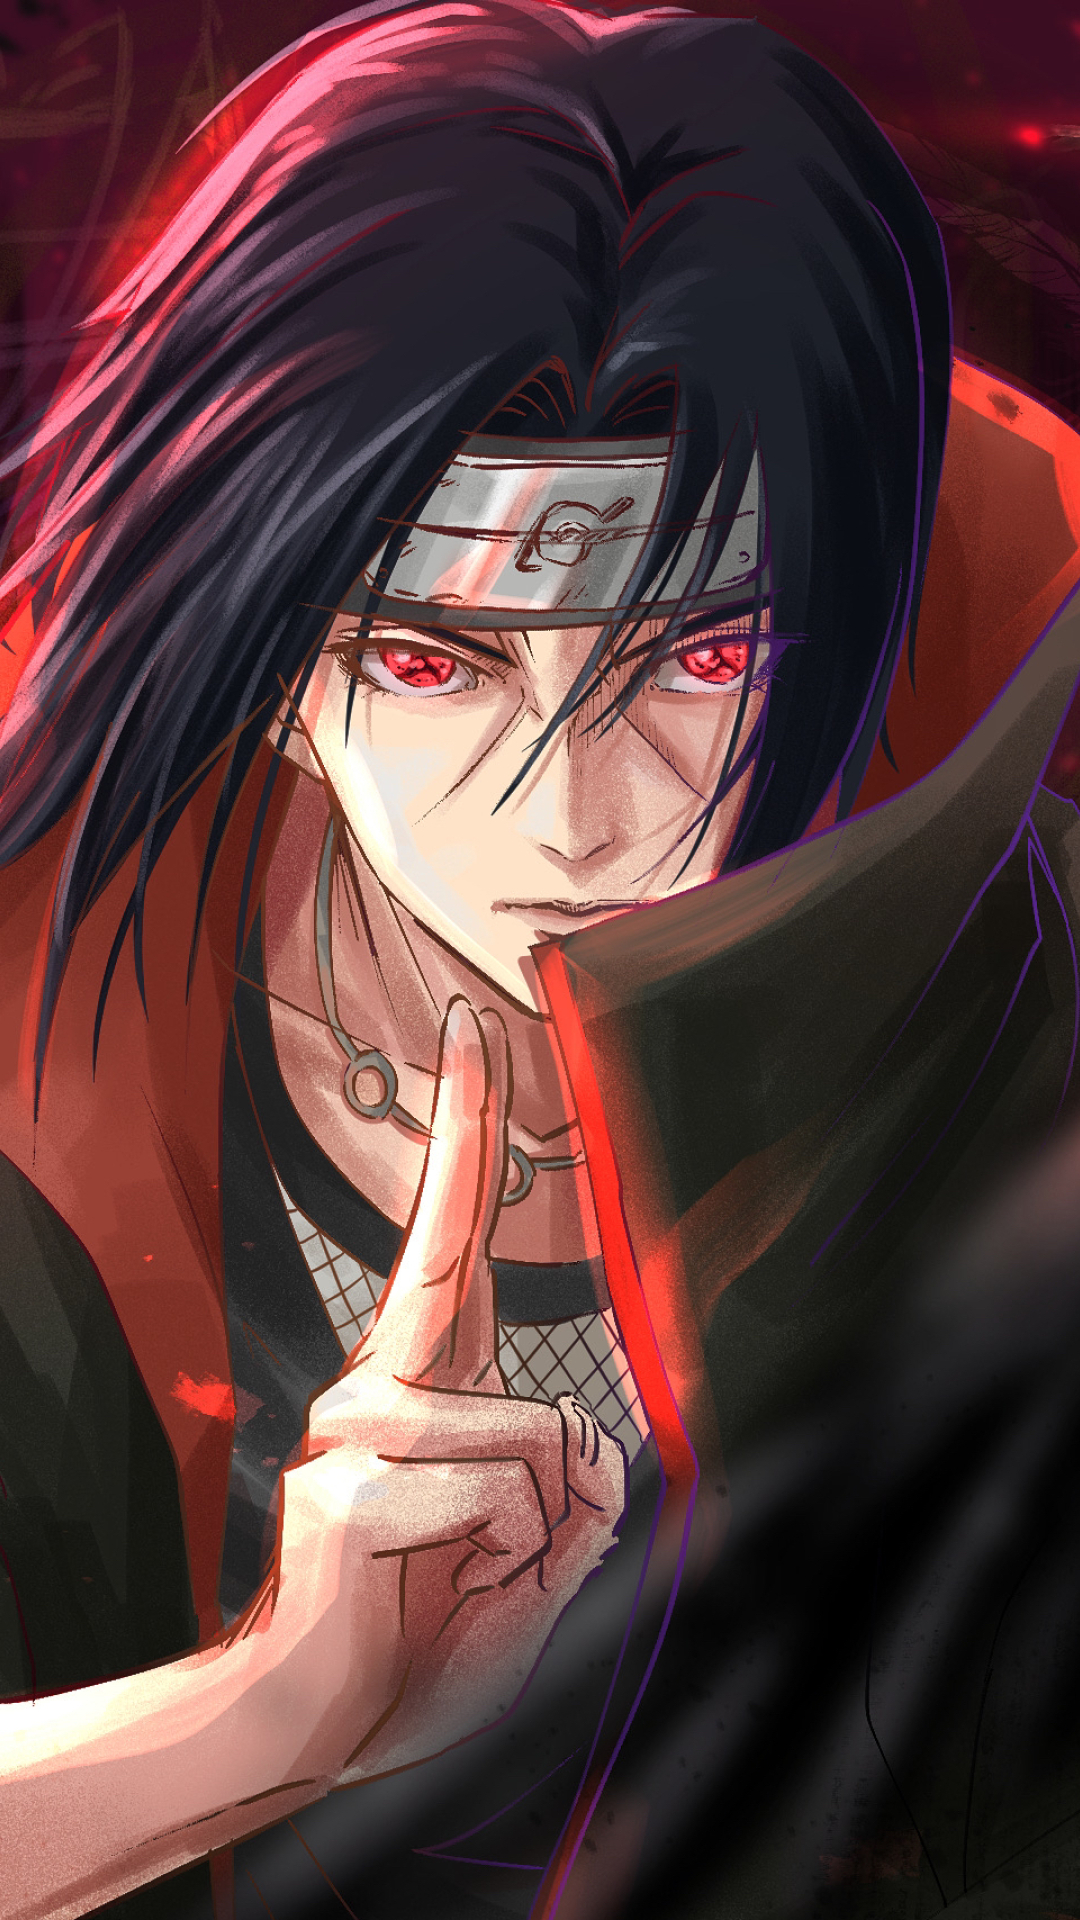 1080x1920 Itachi Uchiha HD Naruto Art Iphone 7, 6s, 6 Plus and Pixel XL  ,One Plus 3, 3t, 5 Wallpaper, HD Anime 4K Wallpapers, Images, Photos and  Background - Wallpapers Den